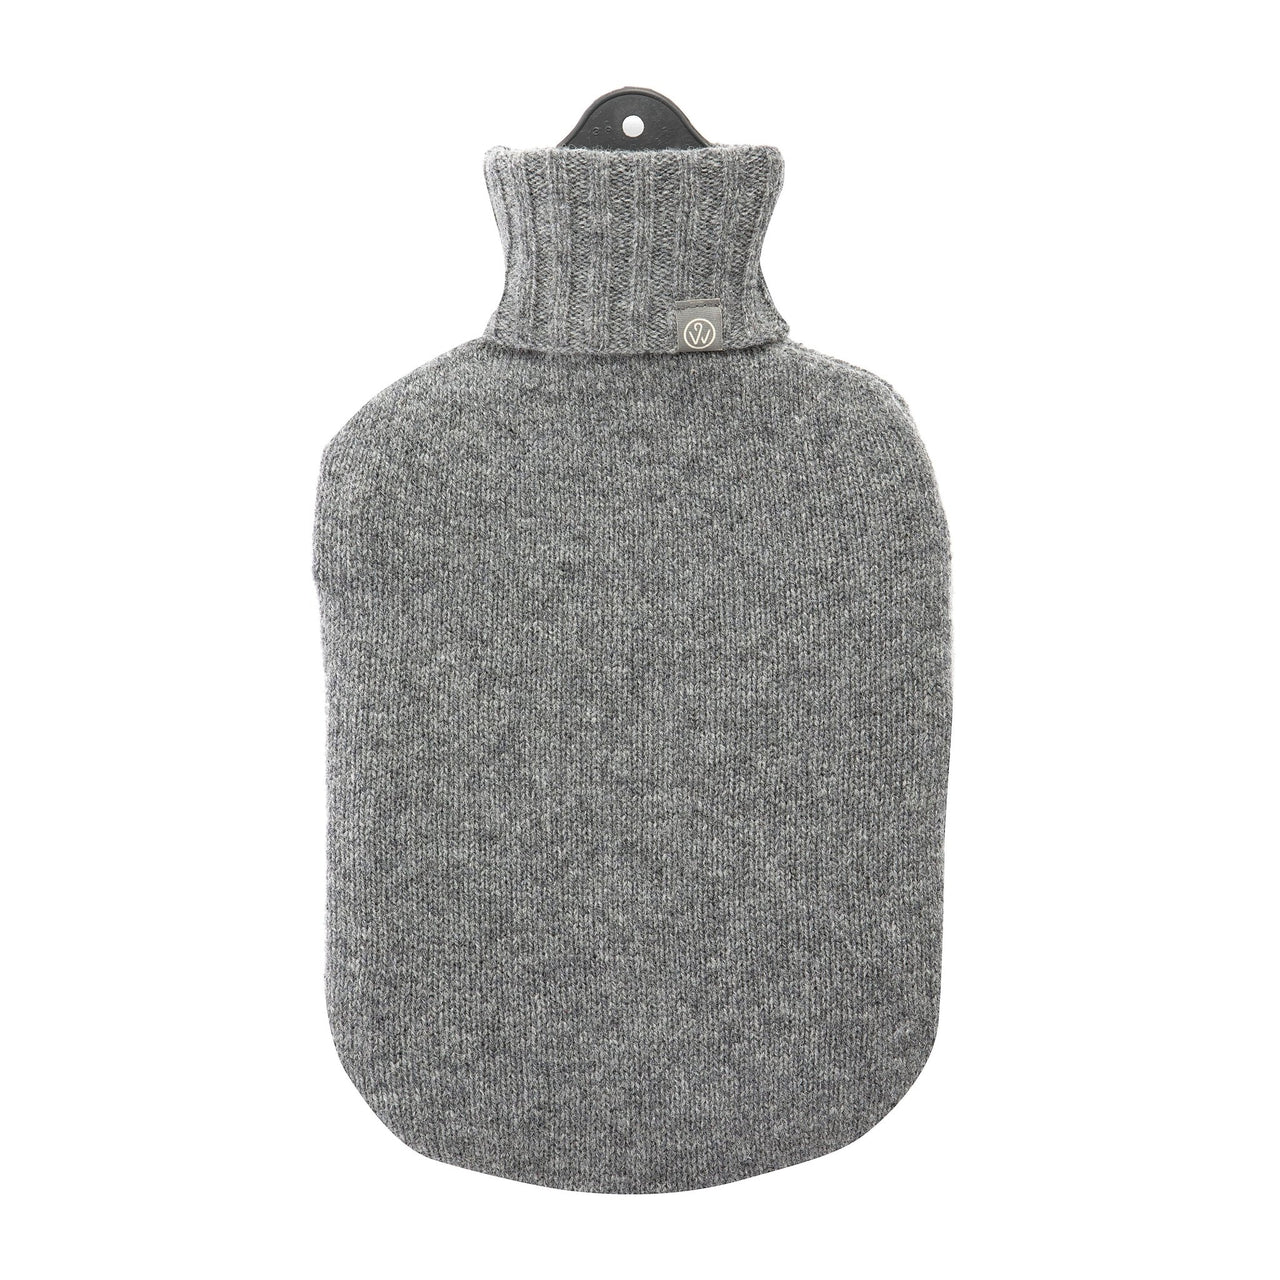 Lambswool Knit Block Colour Sustainable Hot Water Bottle Charcoal Grey - Made Scotland